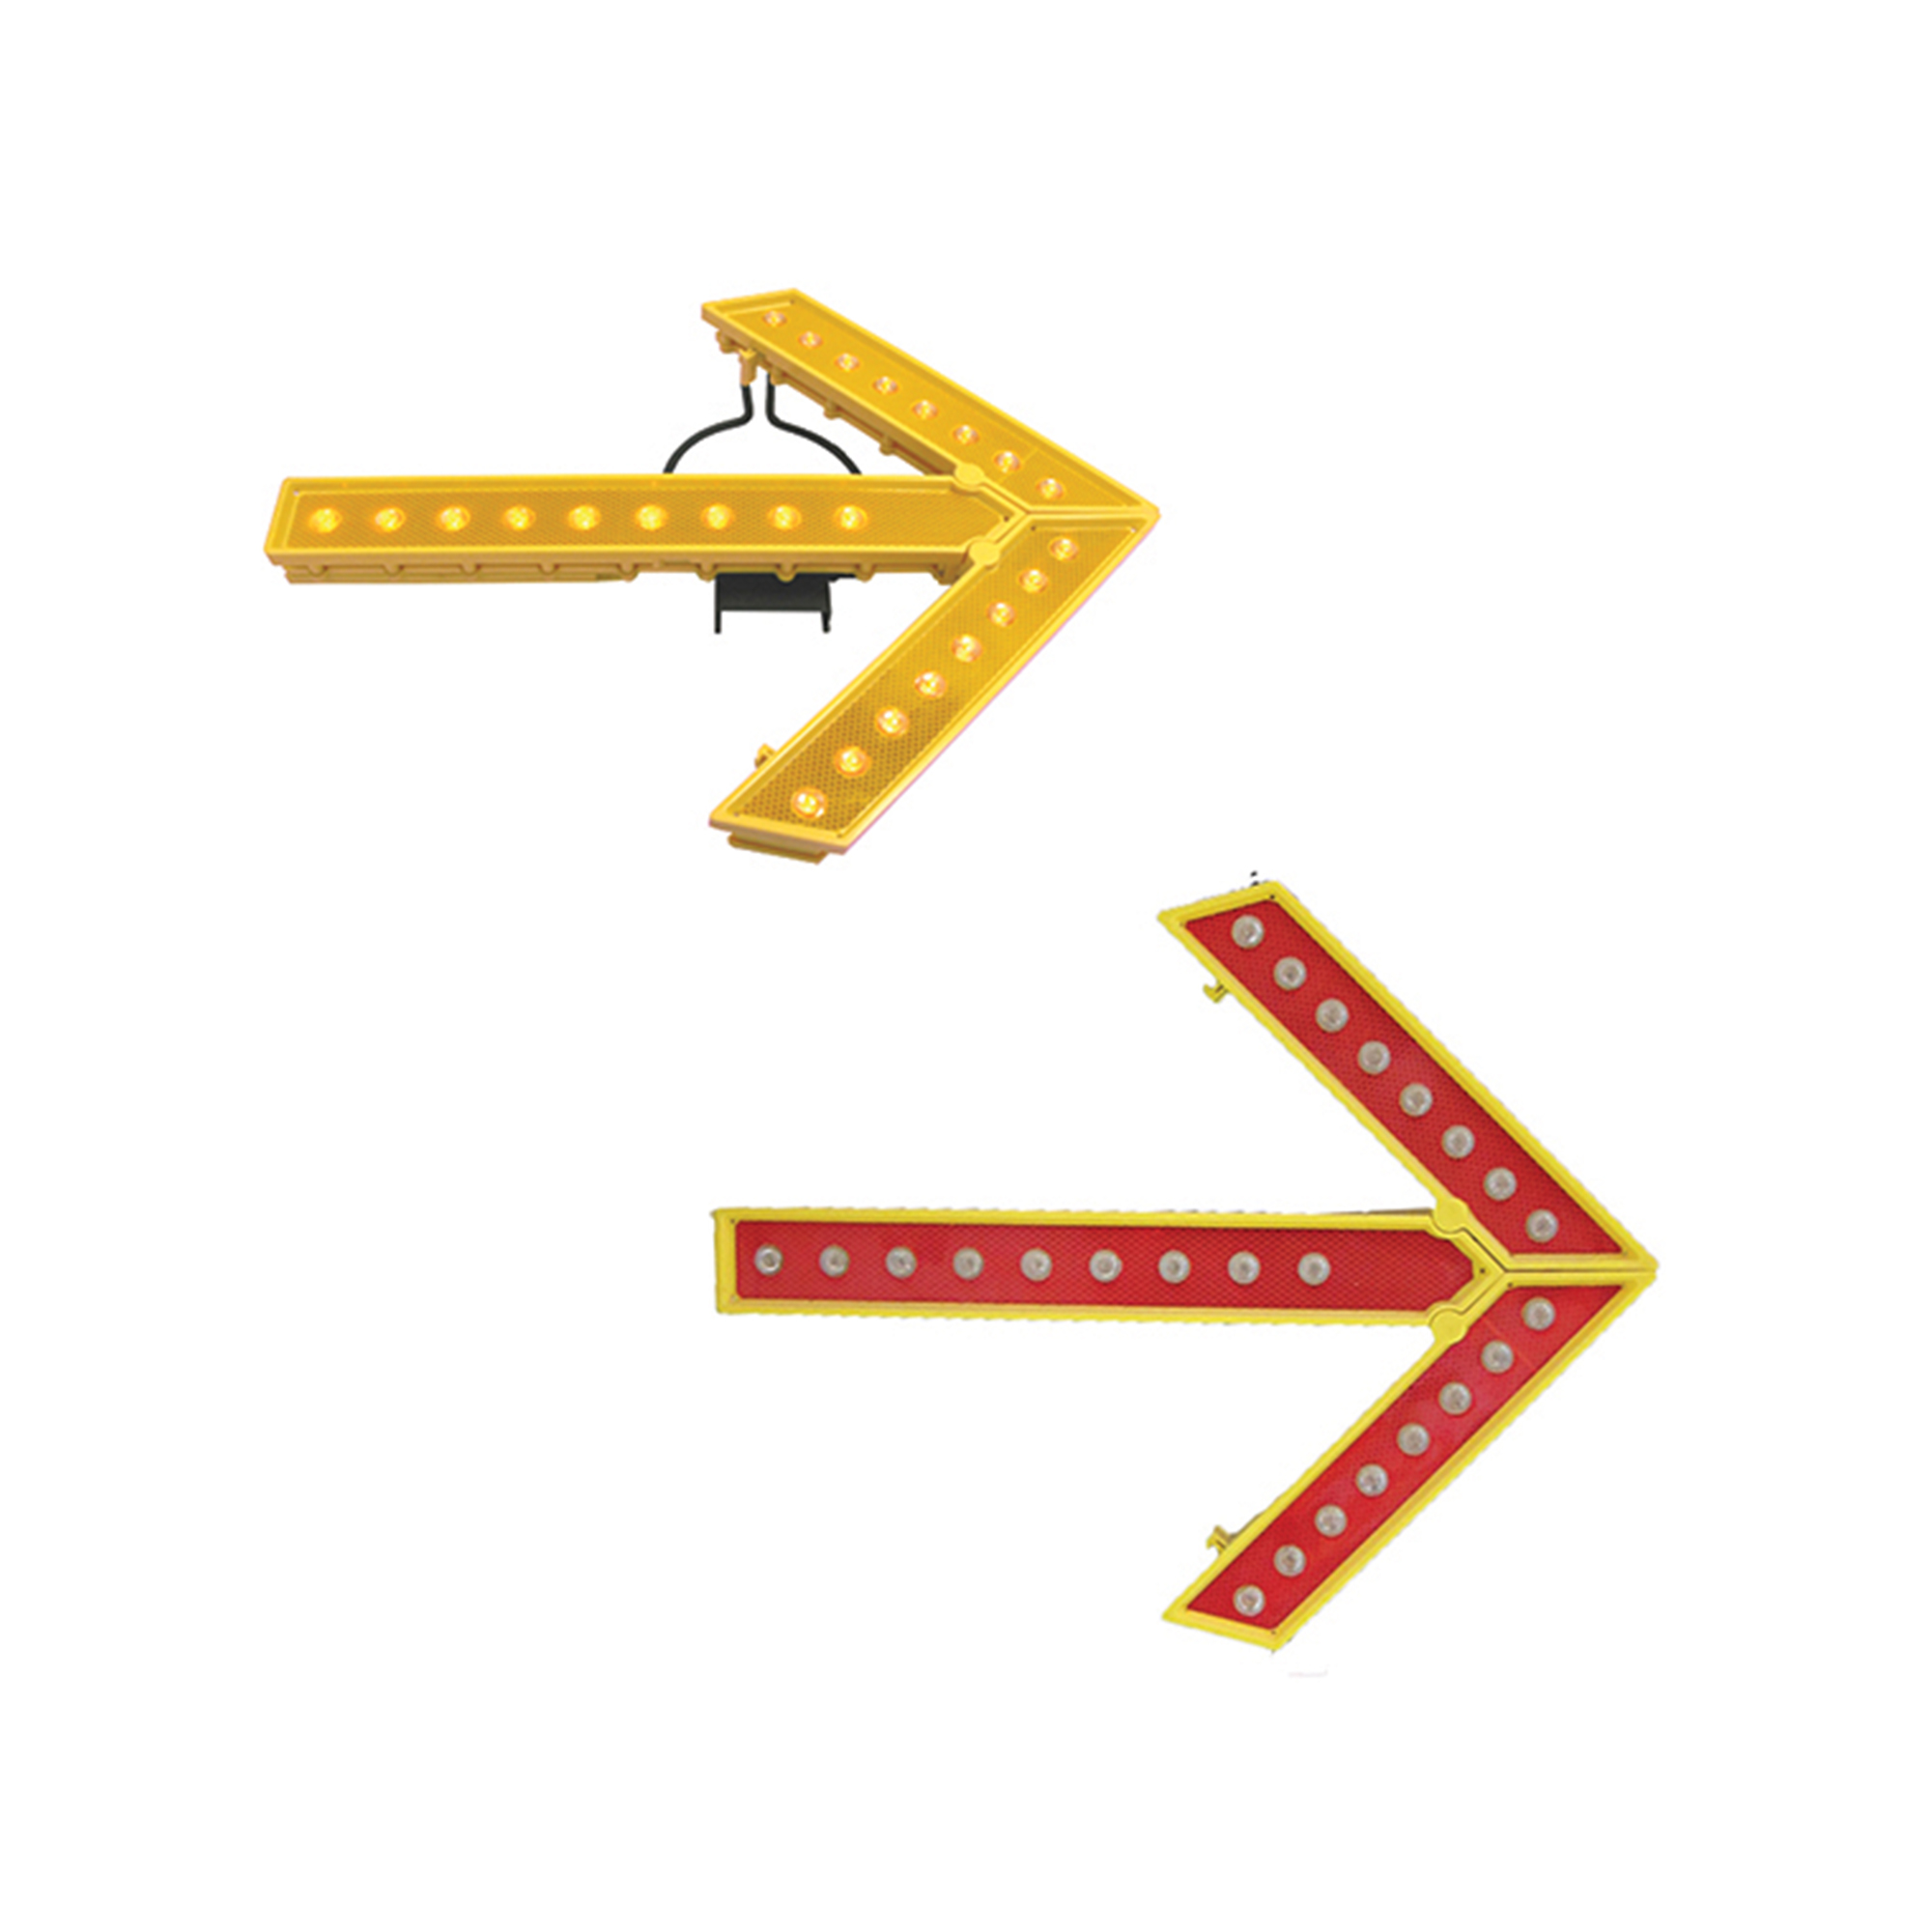  AJT0820 Foldable Arrow Sign (Yellow, Red, Green)